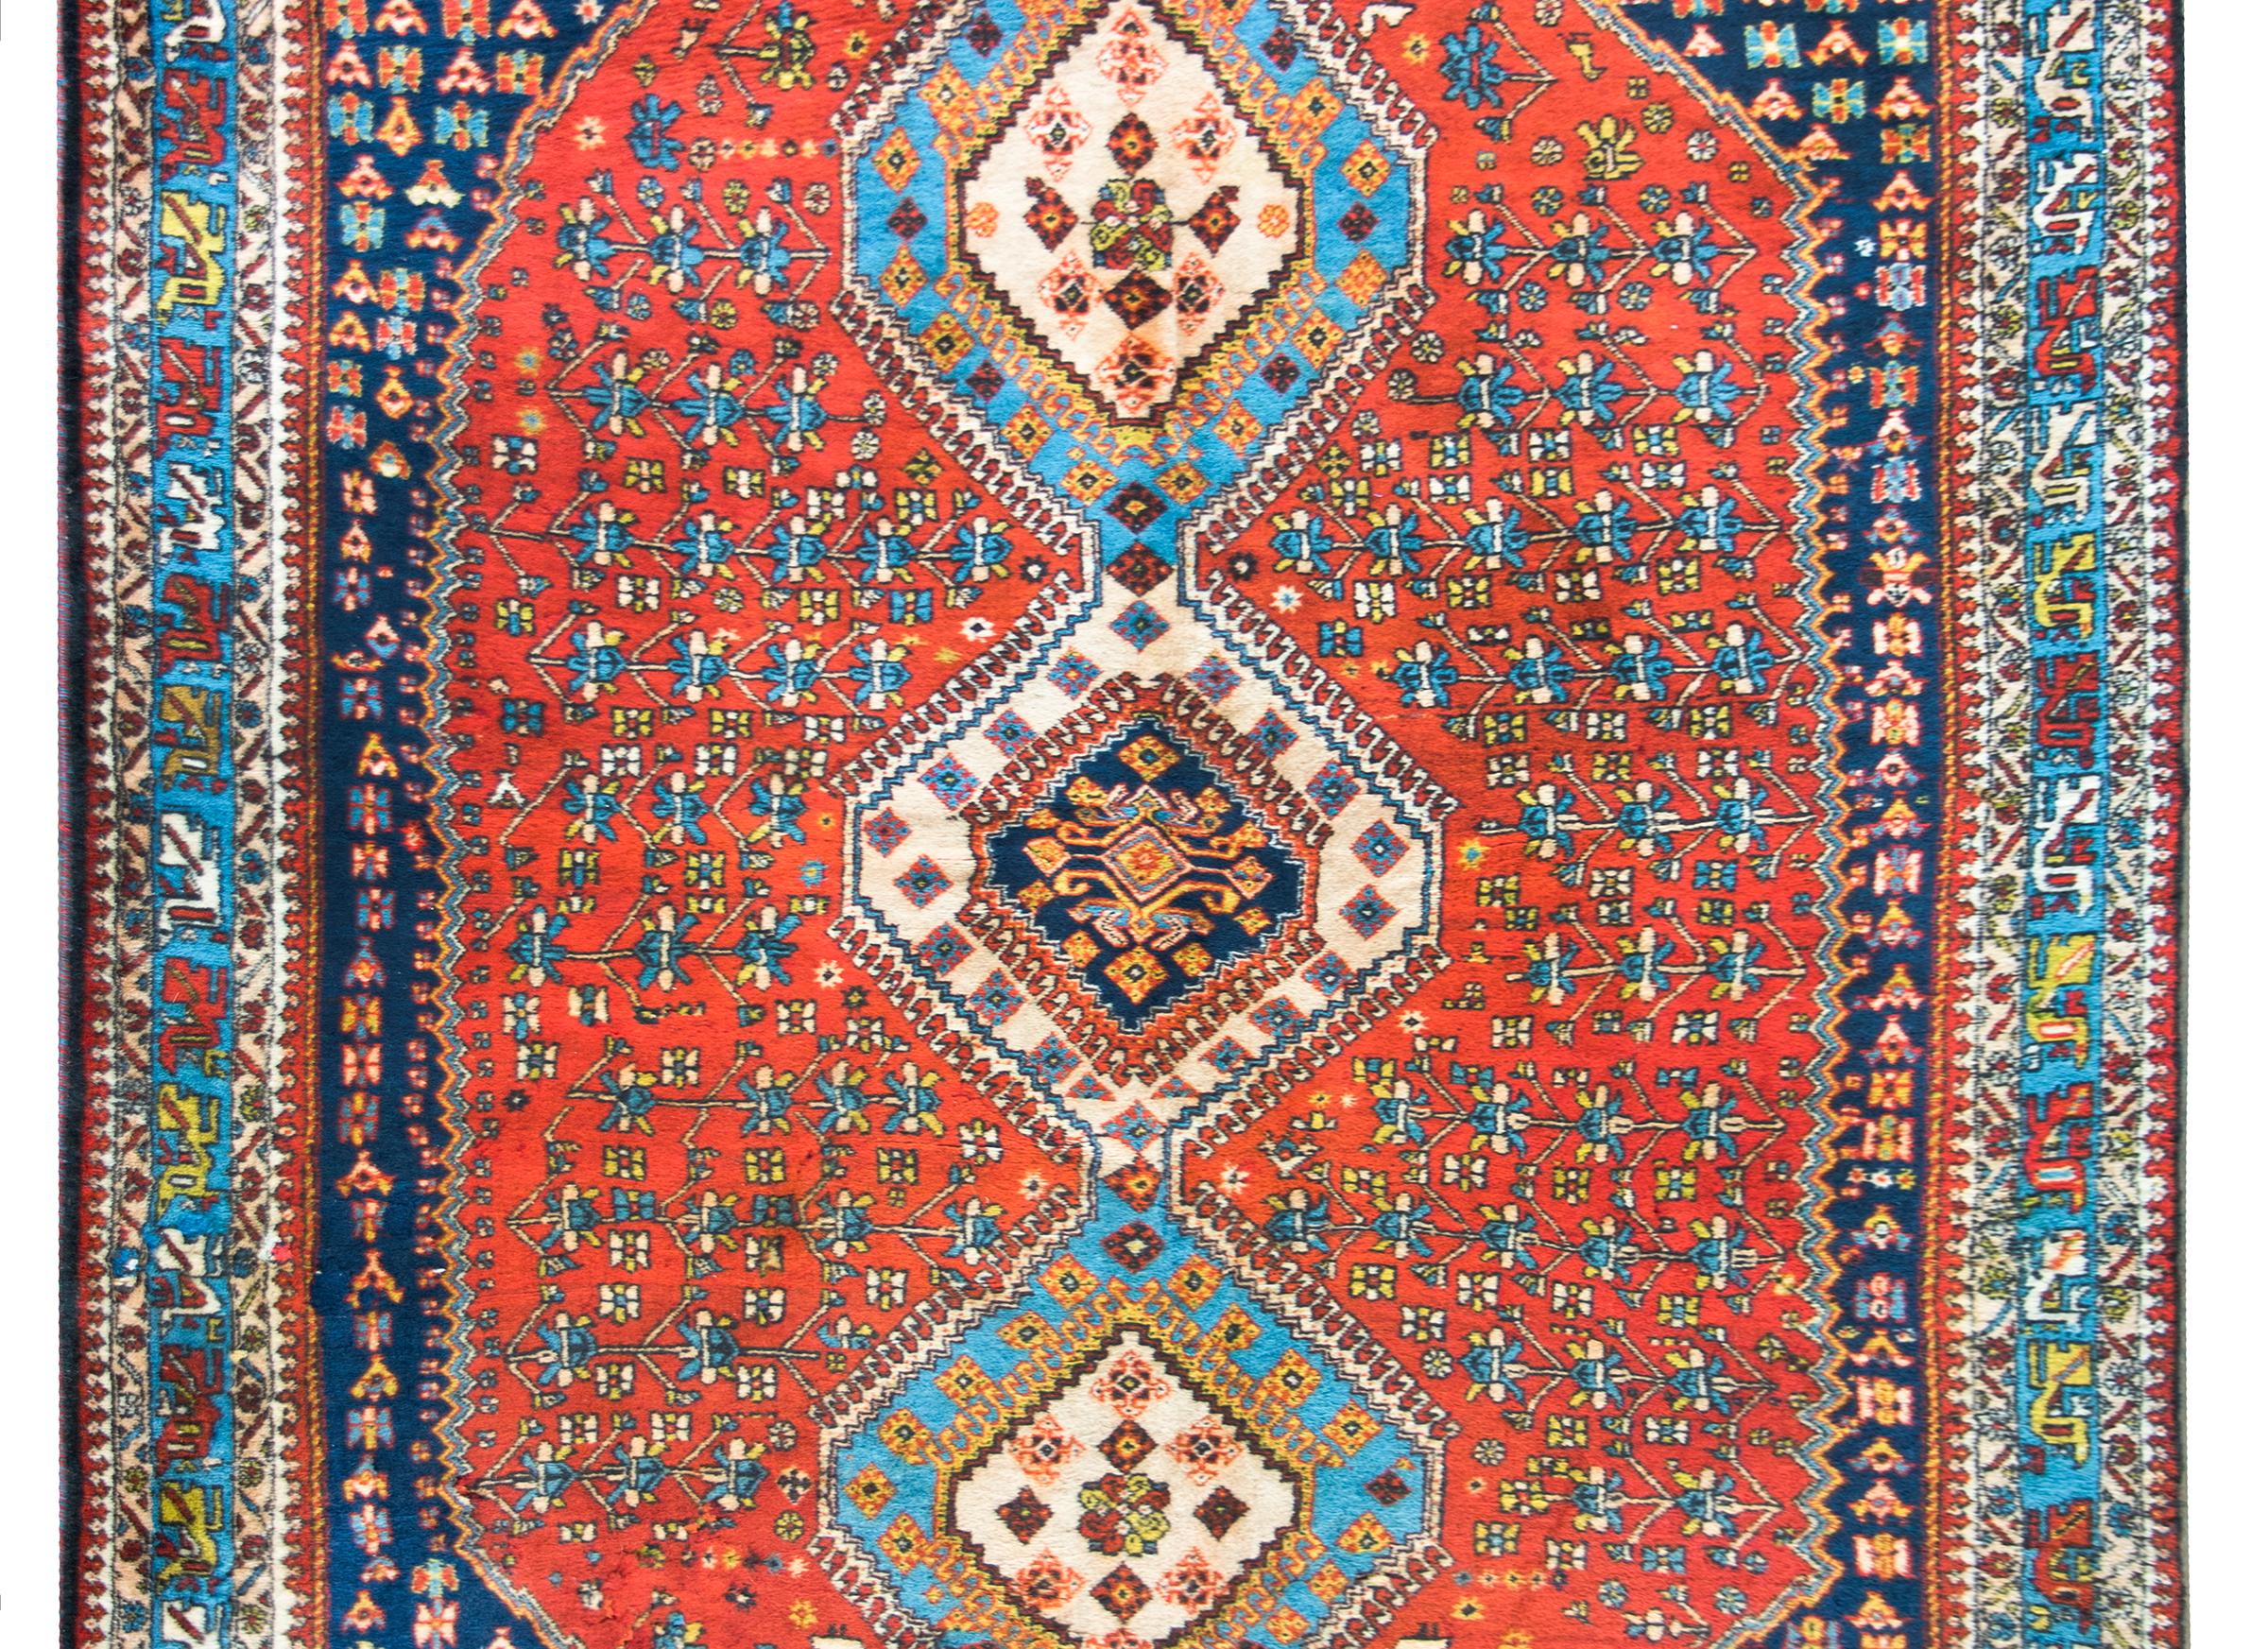 A stunning vintage Persian Yallameh rug with three large central diamond medallions woven with stylized flowers and vines, and living amidst a field of even more densely woven stylized flowers, woven in indigo, gold, white, and crimson, and